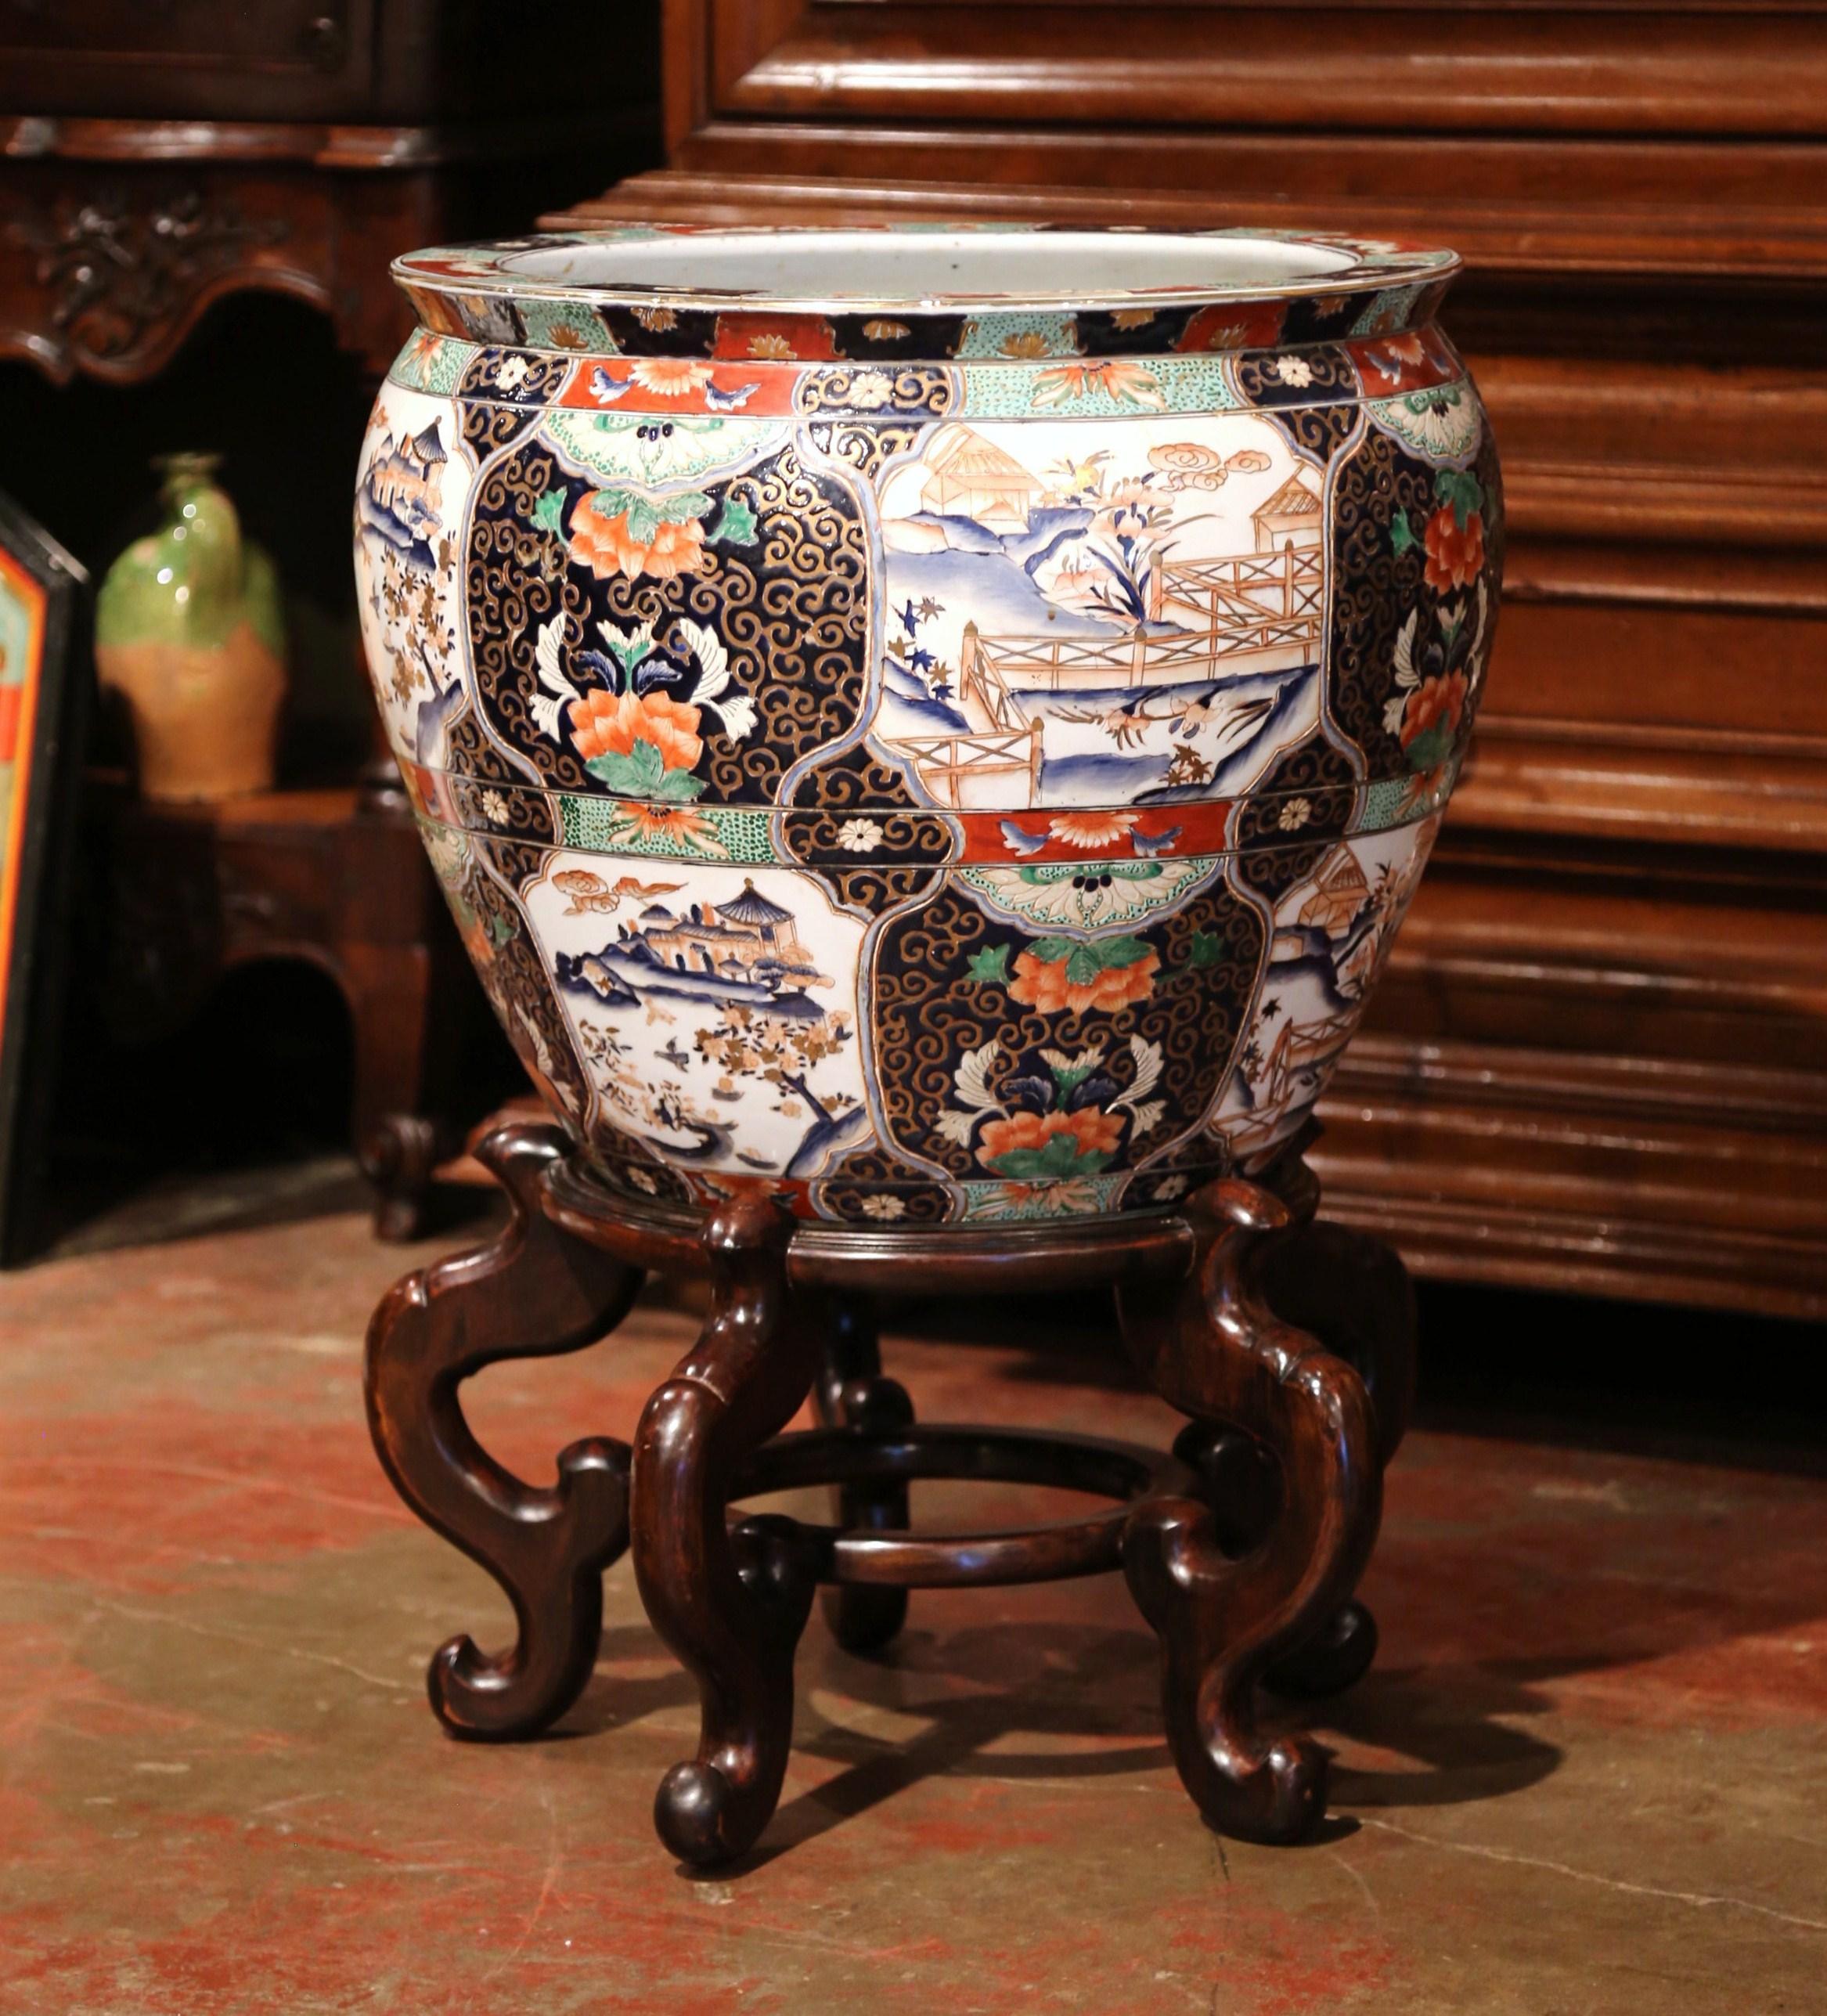 This elegant and colorful vintage fishbowl sited on carved fruitwood base was created in China, circa 1960. Round in shape, the large, exotic porcelain planter features Classic oriental floral and landscape scenes throughout. The ceramic bowl is